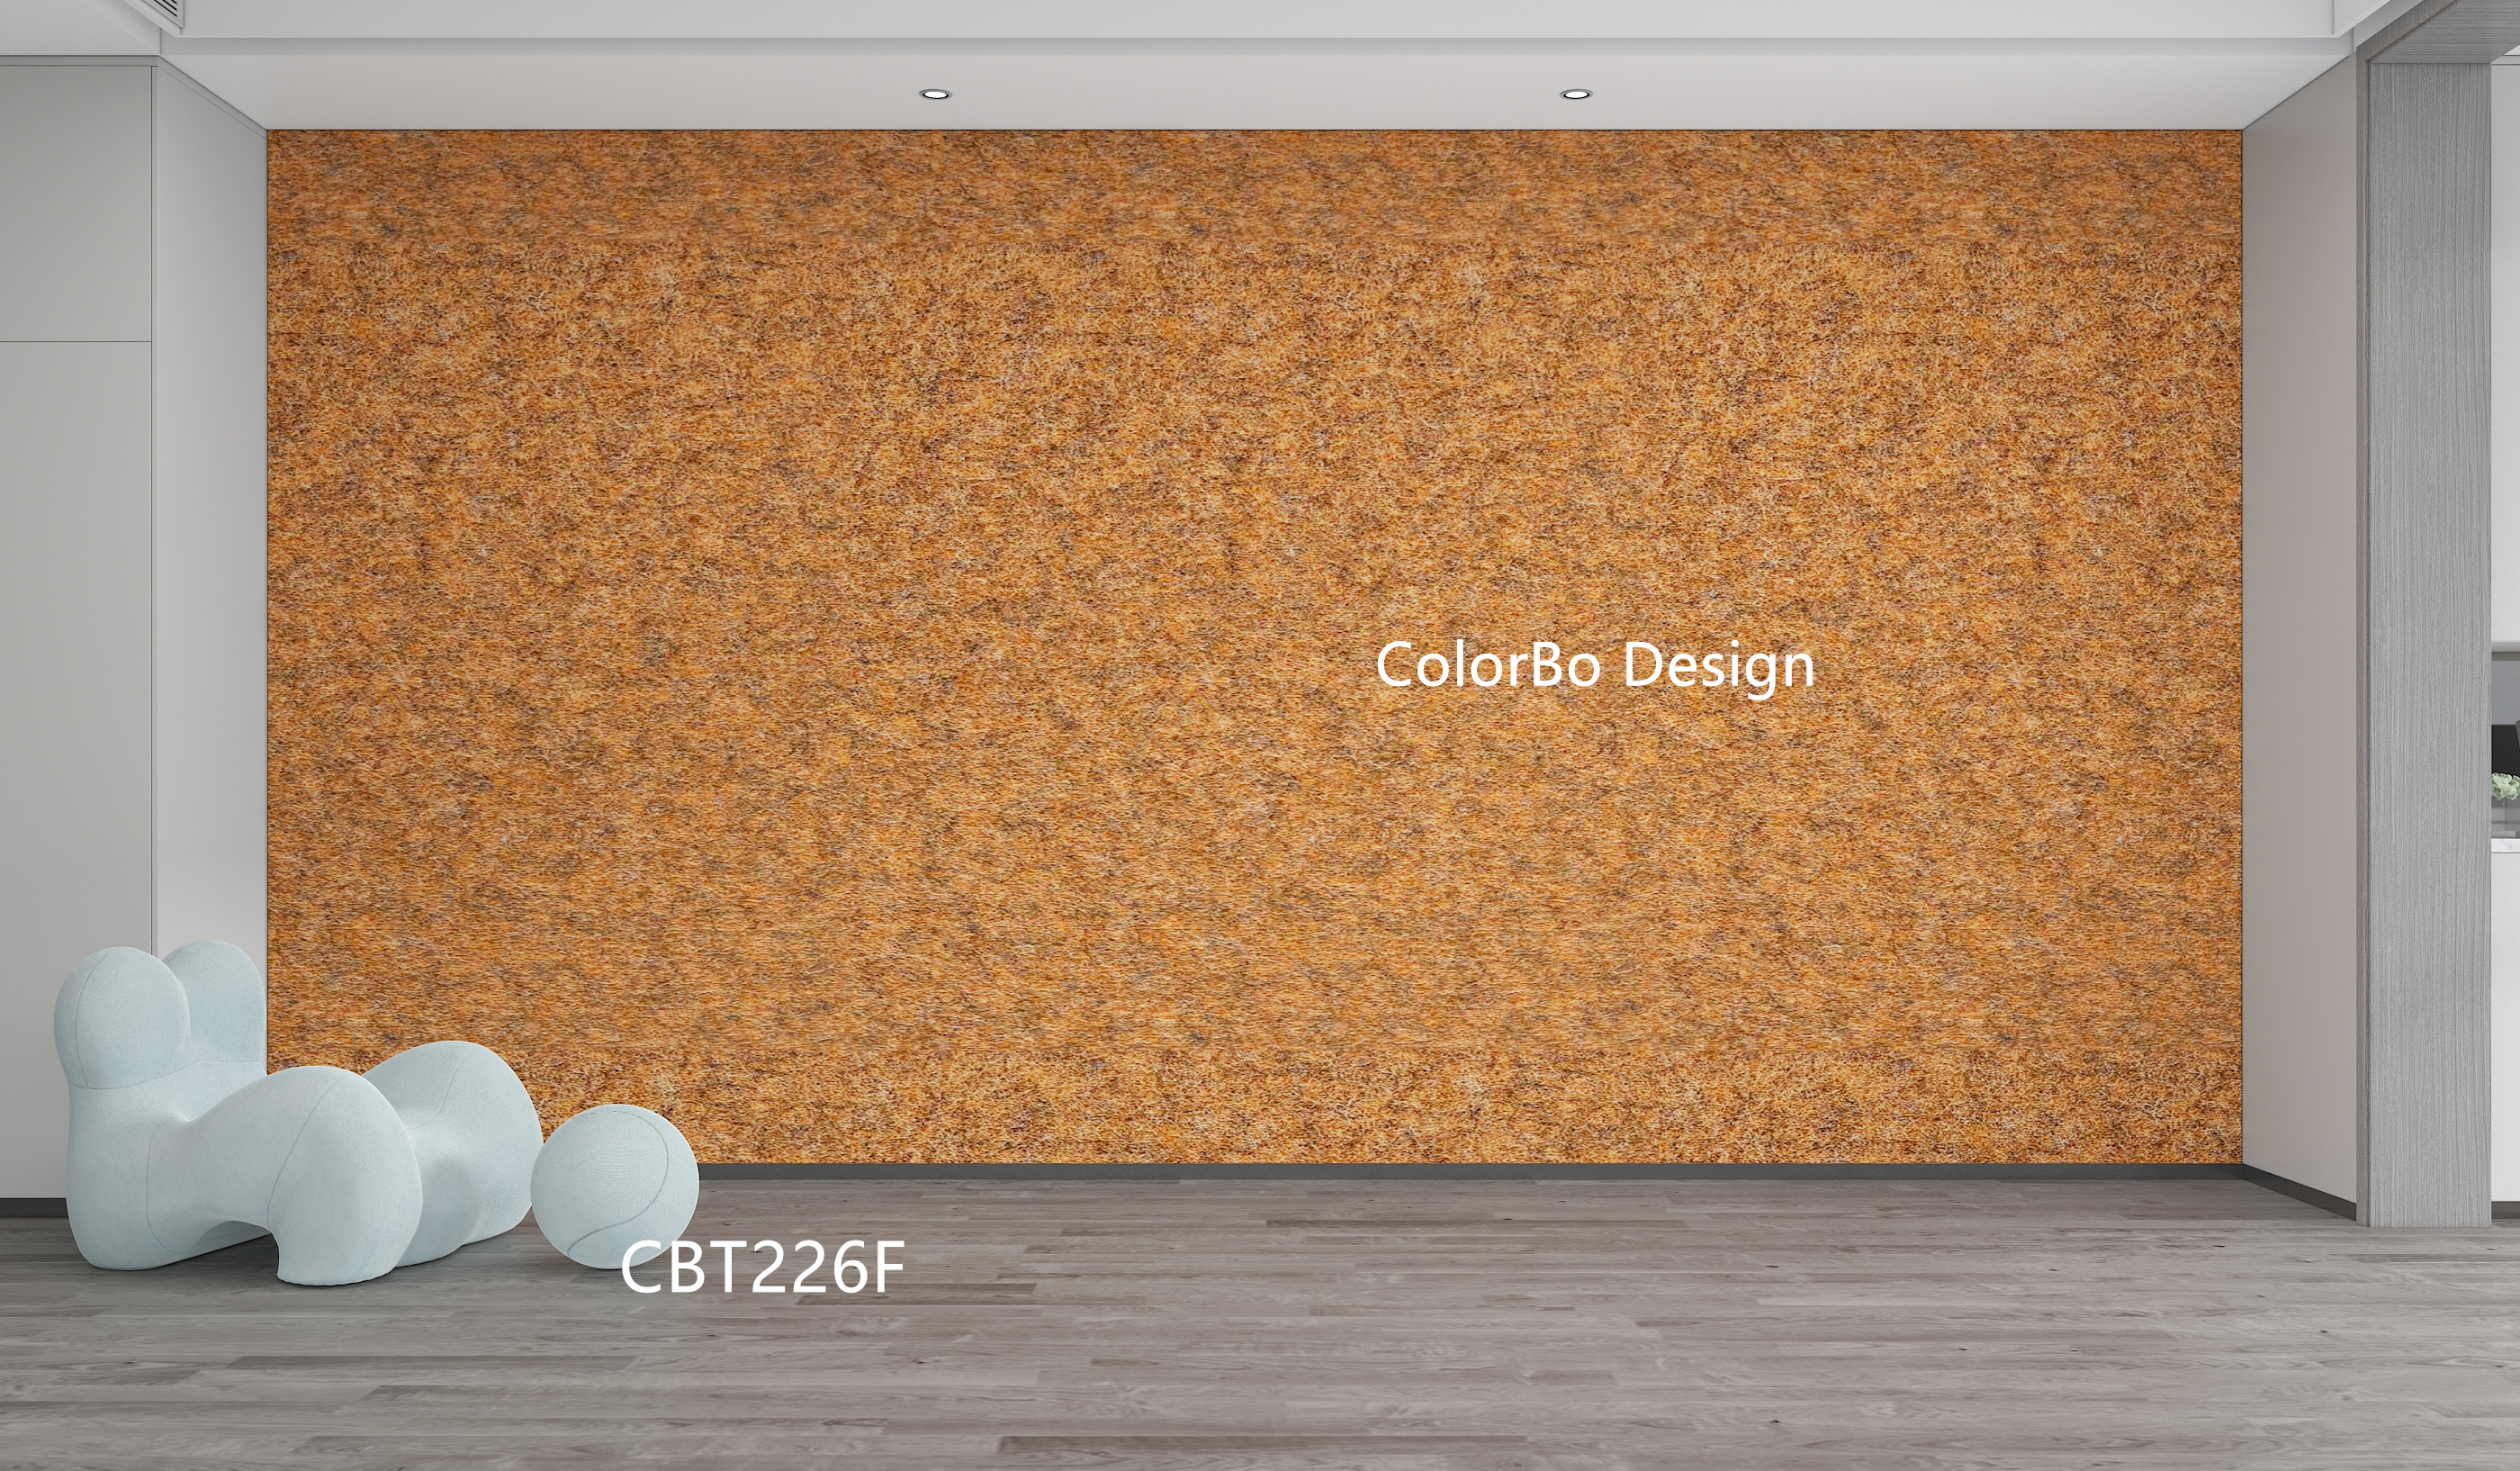 CBT226F Sound Absorbing Felt Panels for The Interior Decoration Stylish Drop Ceiling Tiles